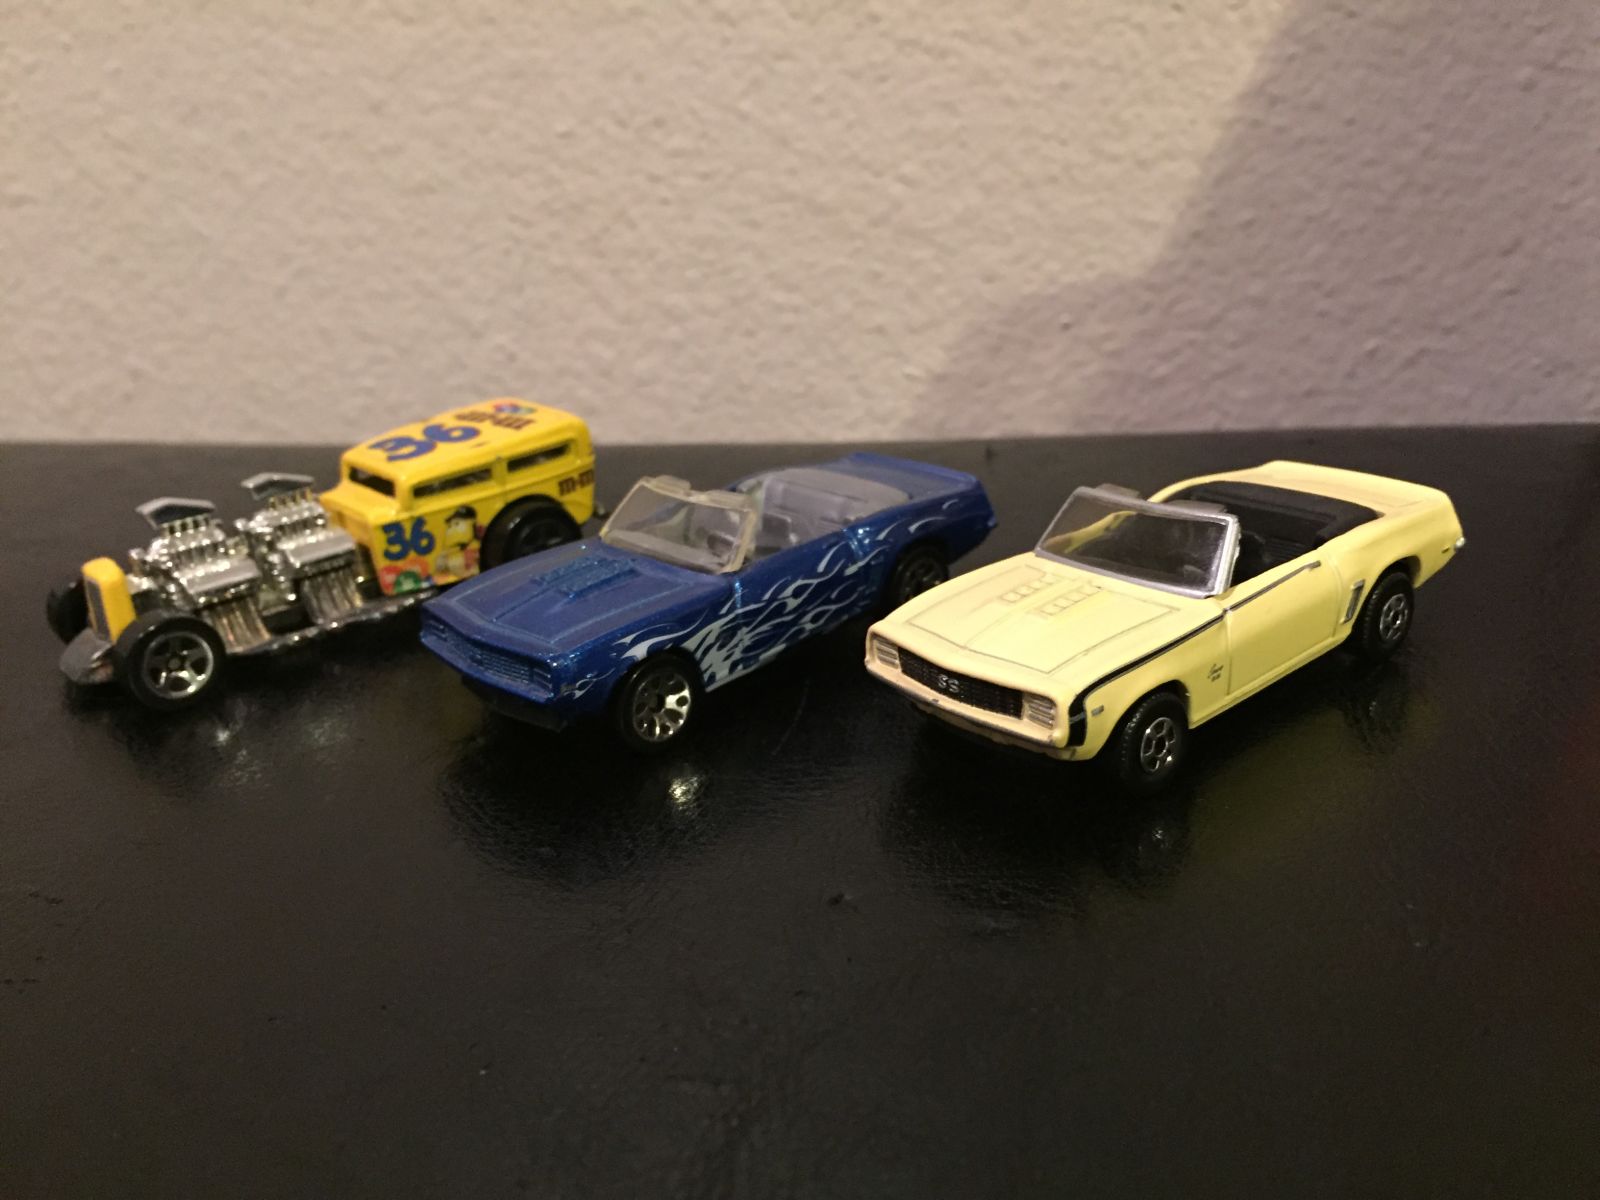 These were some of the cars I found in my old room. The camaros are matchbox, the one on the right has some awesome detail and will be In line for a wheel swap In the future. The hot rod in the end will be a future custom as well. 